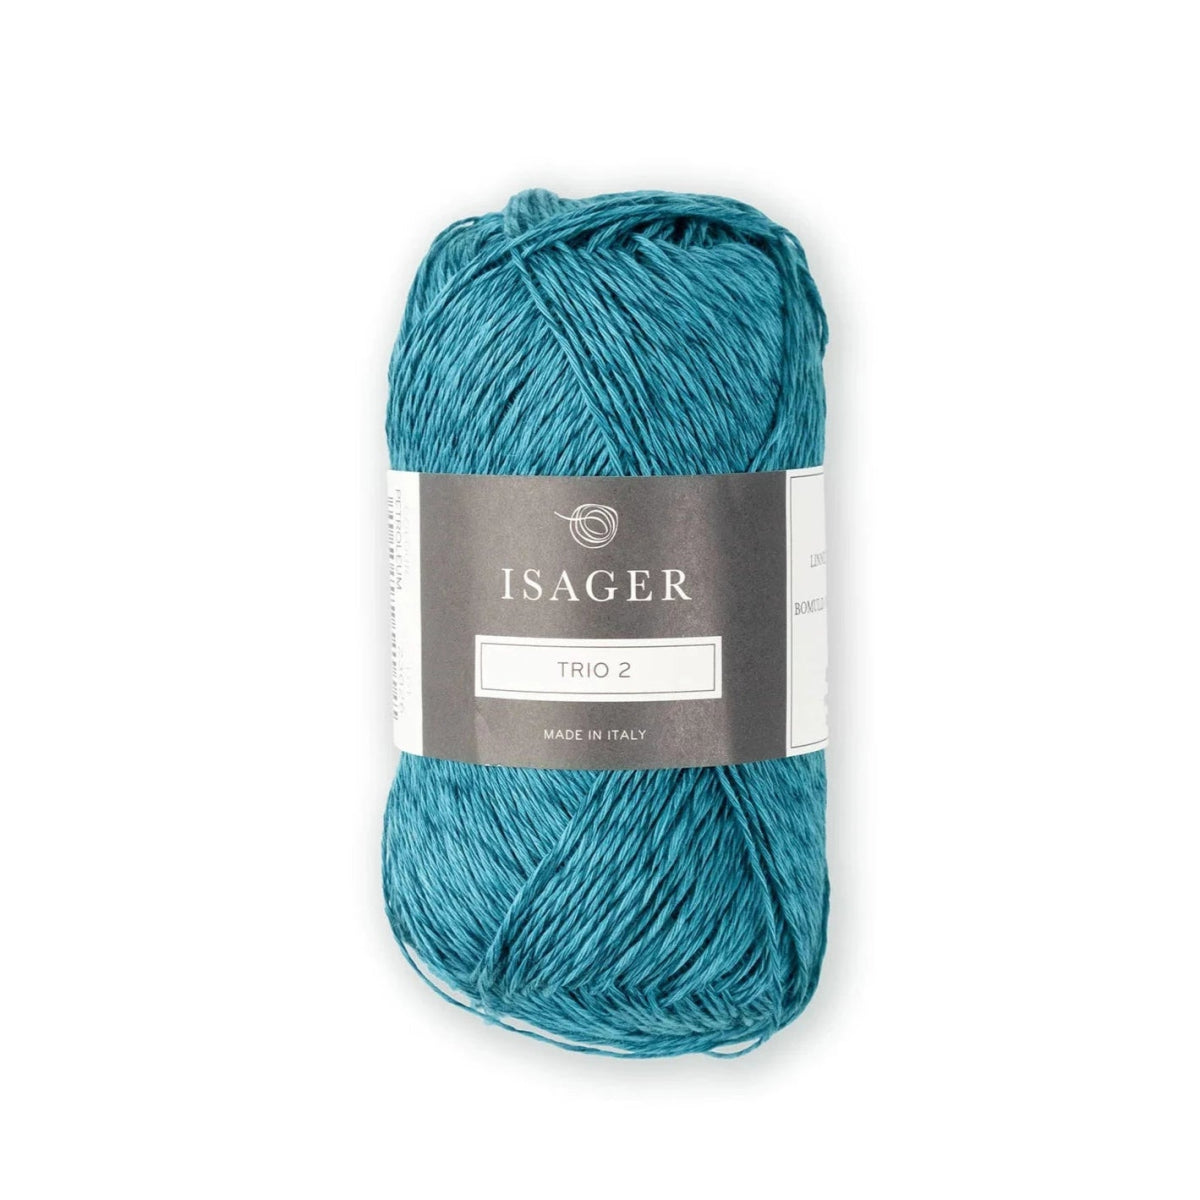 Isager Trio 2 - Petroleum - 5 Ply - Cotton - The Little Yarn Store